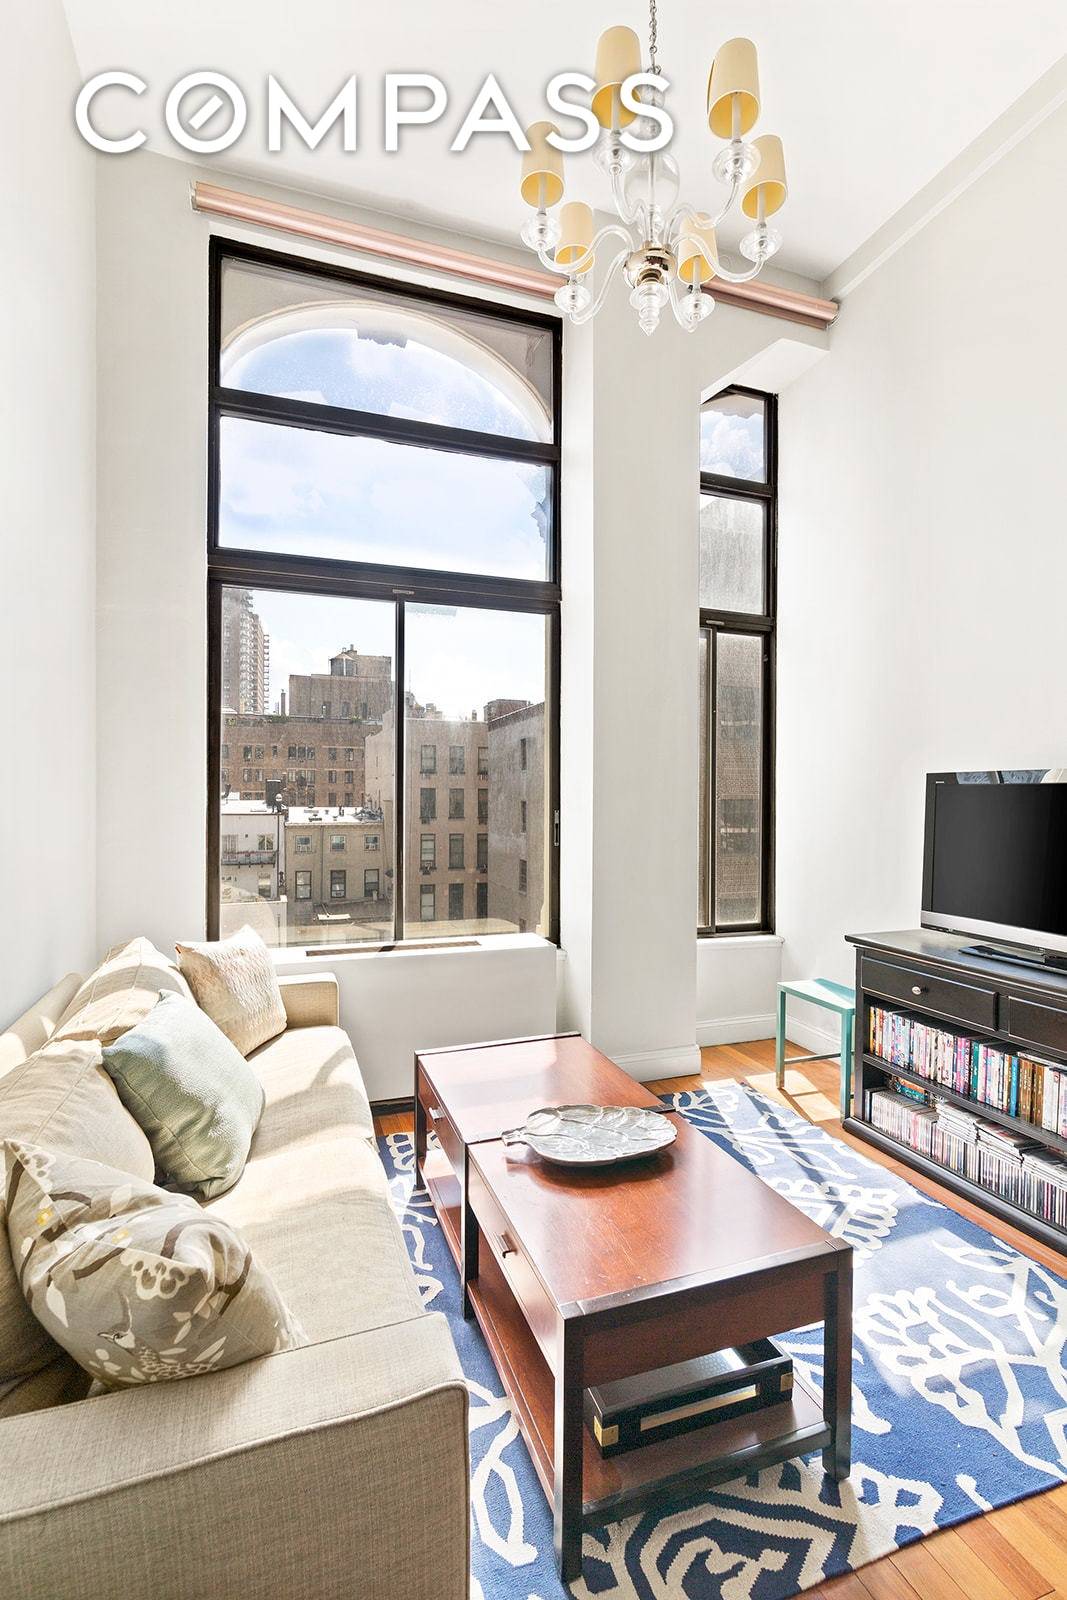 Sunny, south facing, mint condition duplex studio with separate sleeping loft in the iconic Cast Iron building located right off of Broadway in Greenwich Village.